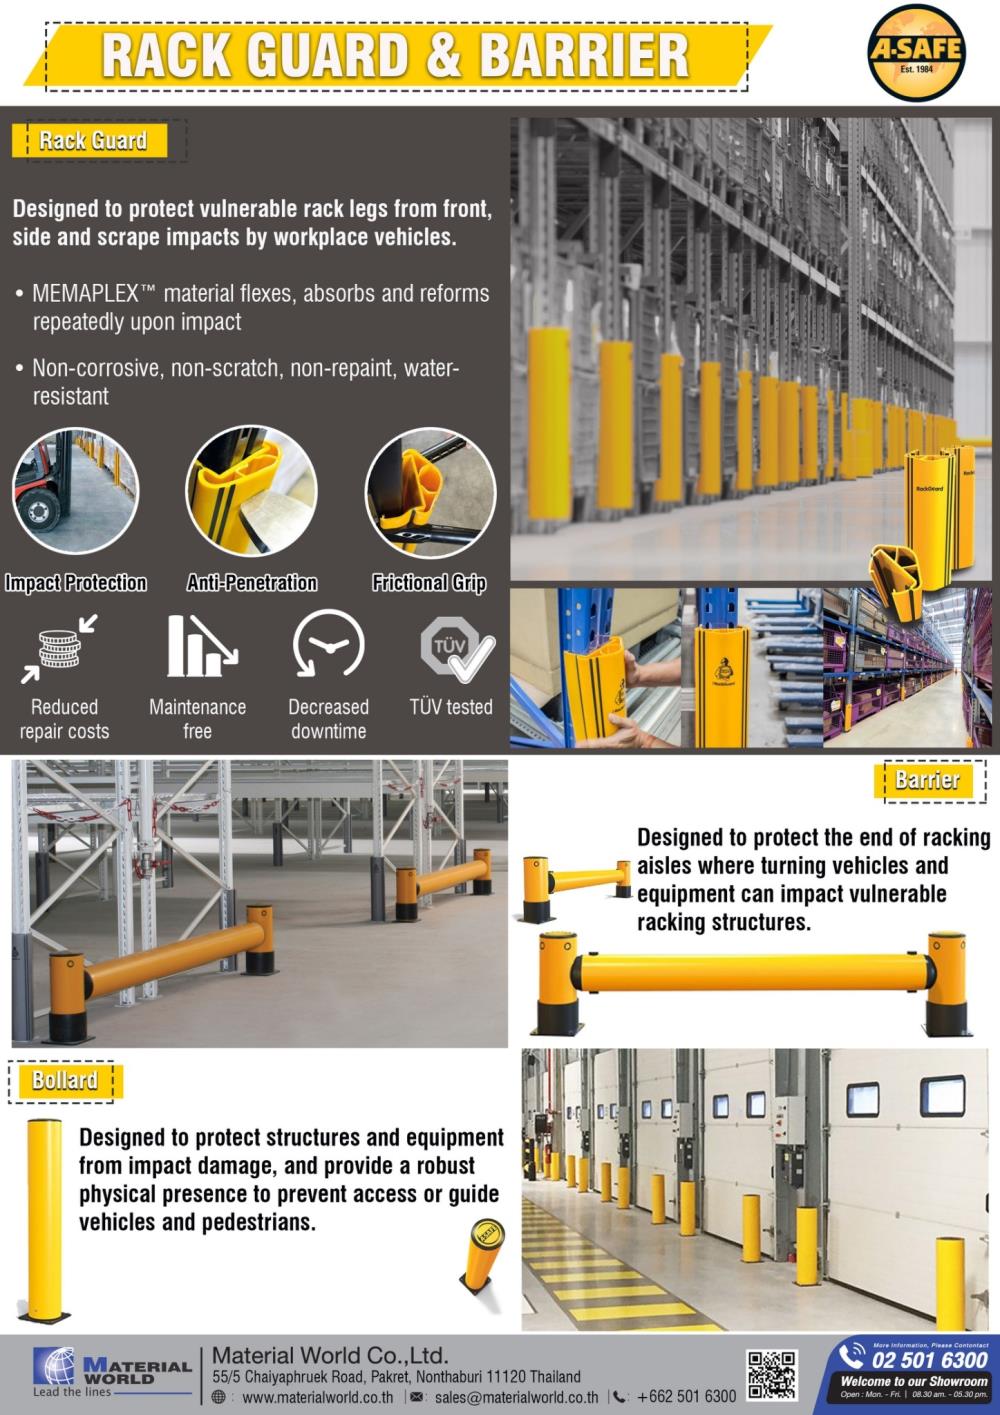 Rack Guard (กันชน),กันชนเสา,A-Safe,Instruments and Controls/Accessories/Protectors